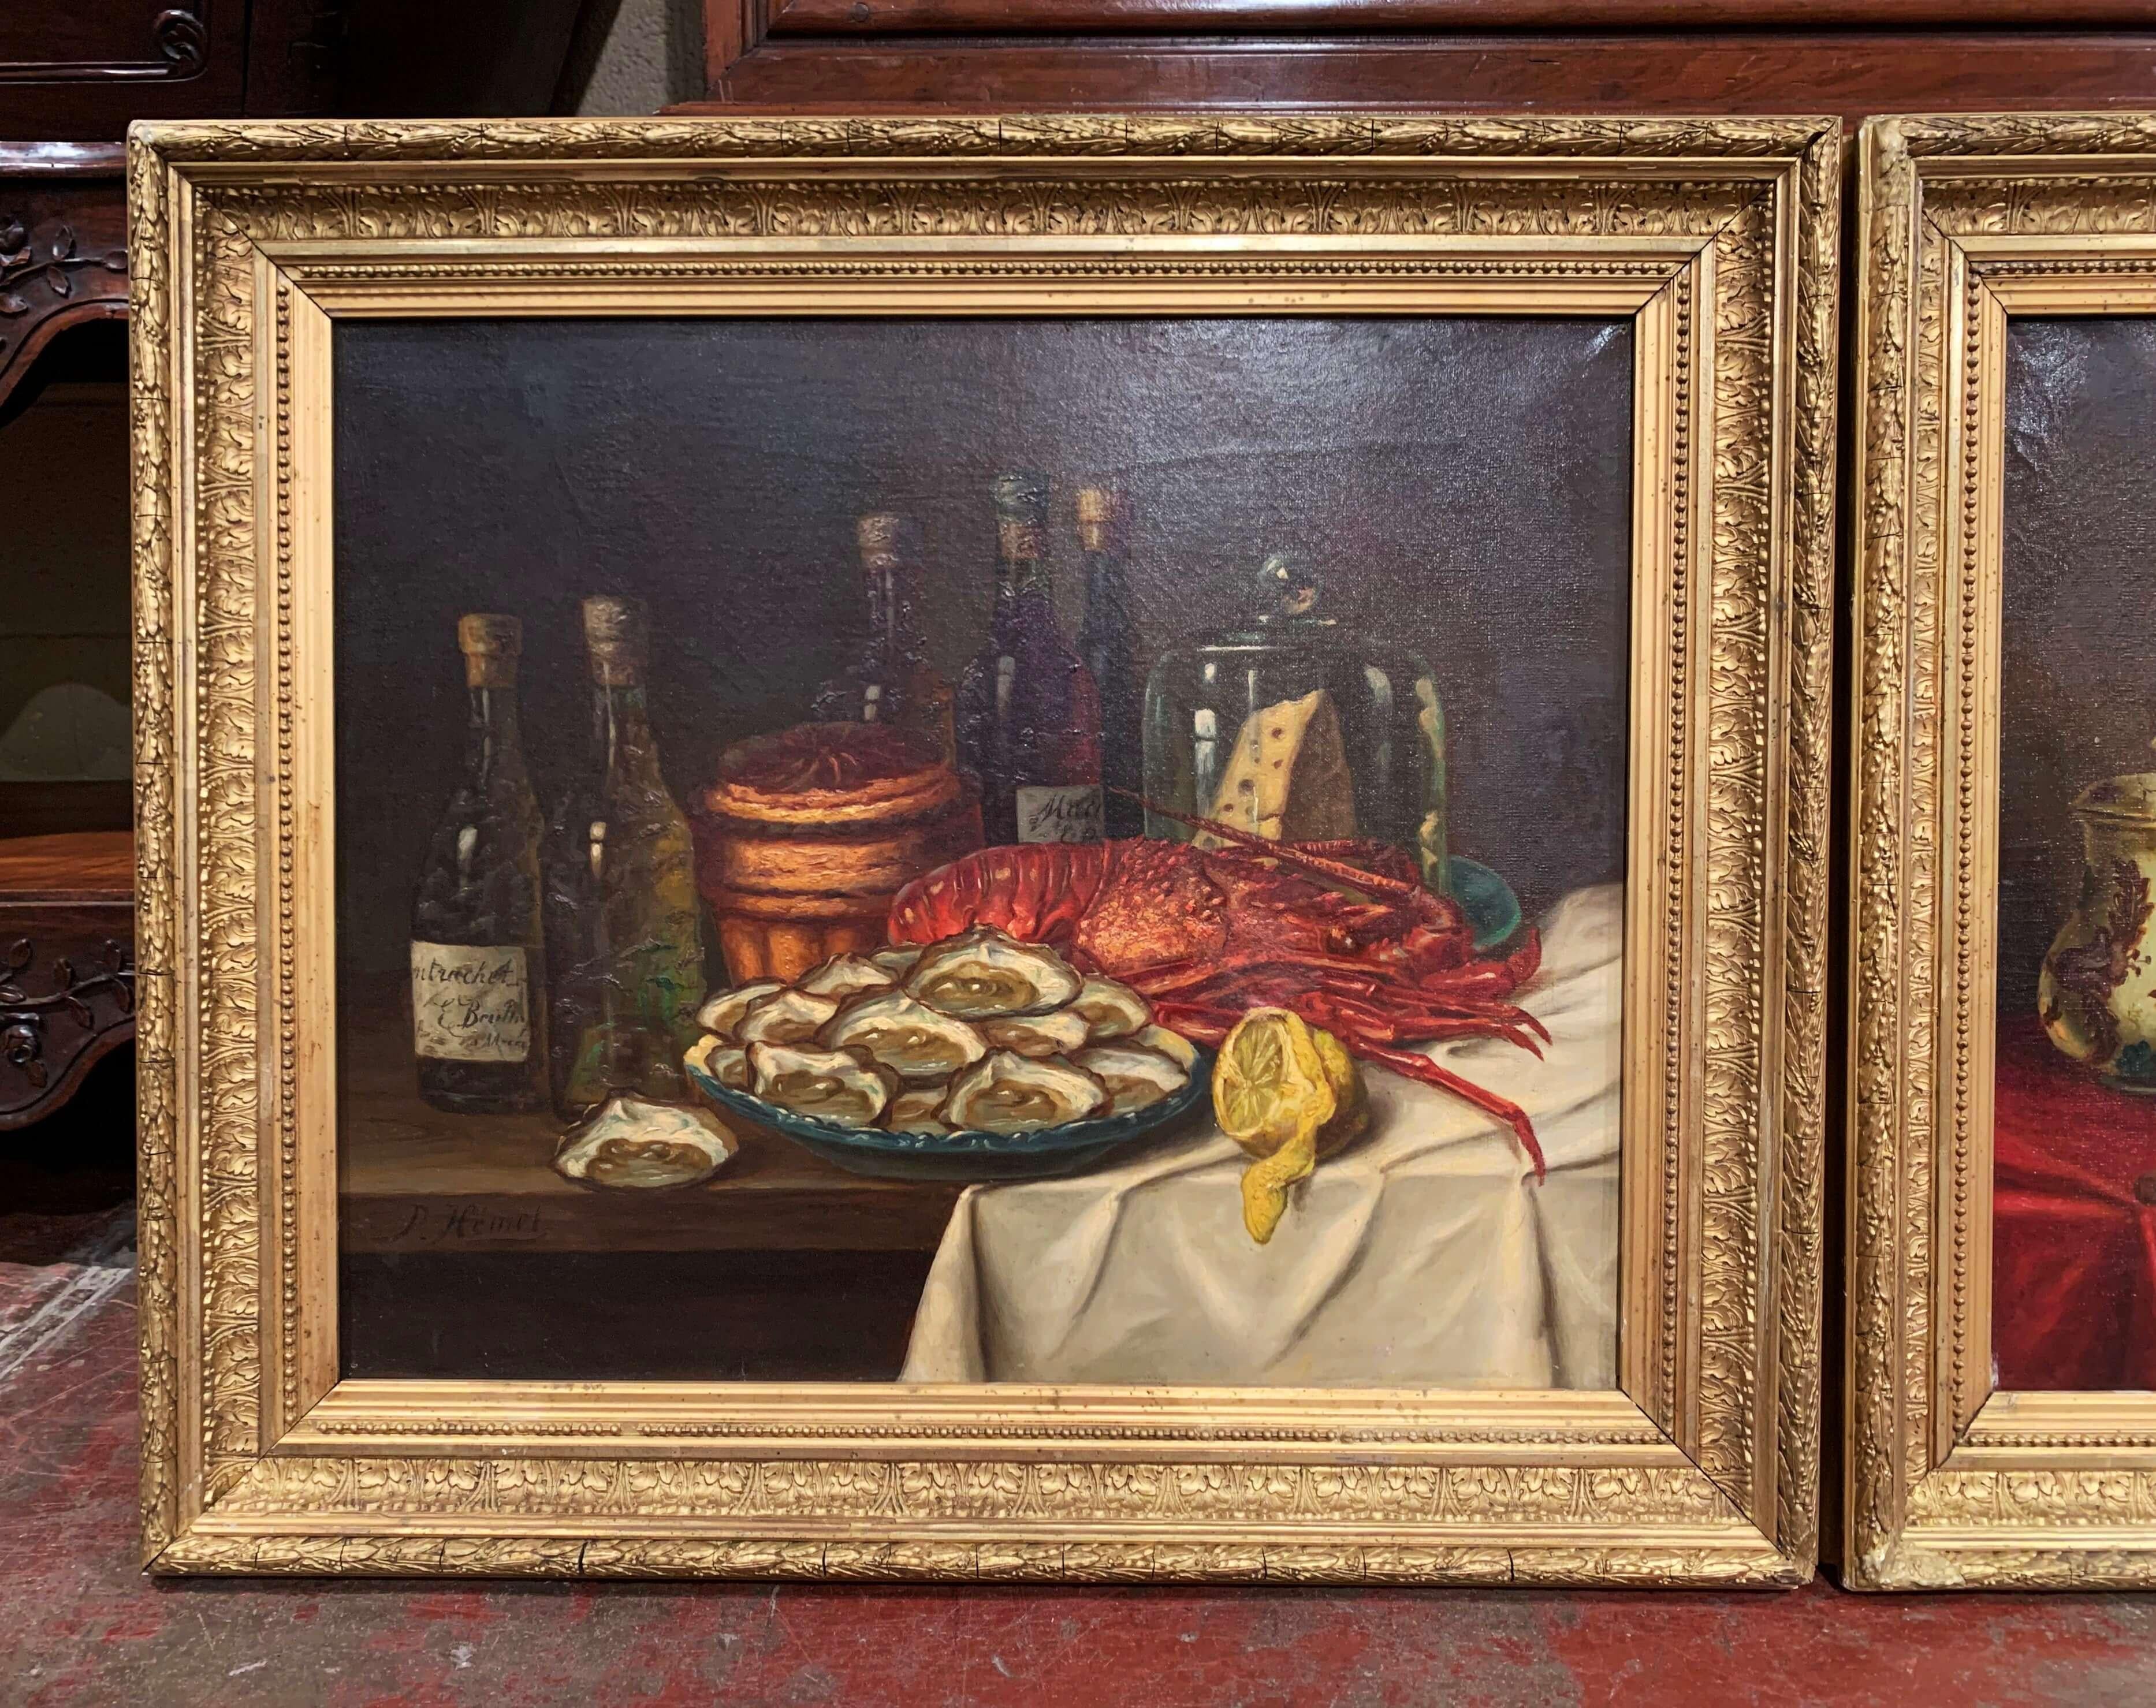 Invite vibrant color into your home with this traditional pair of antique still life paintings. The paintings were crafted in France circa 1880 and are set in ornate, carved gilt frames. Each canvas depicts 